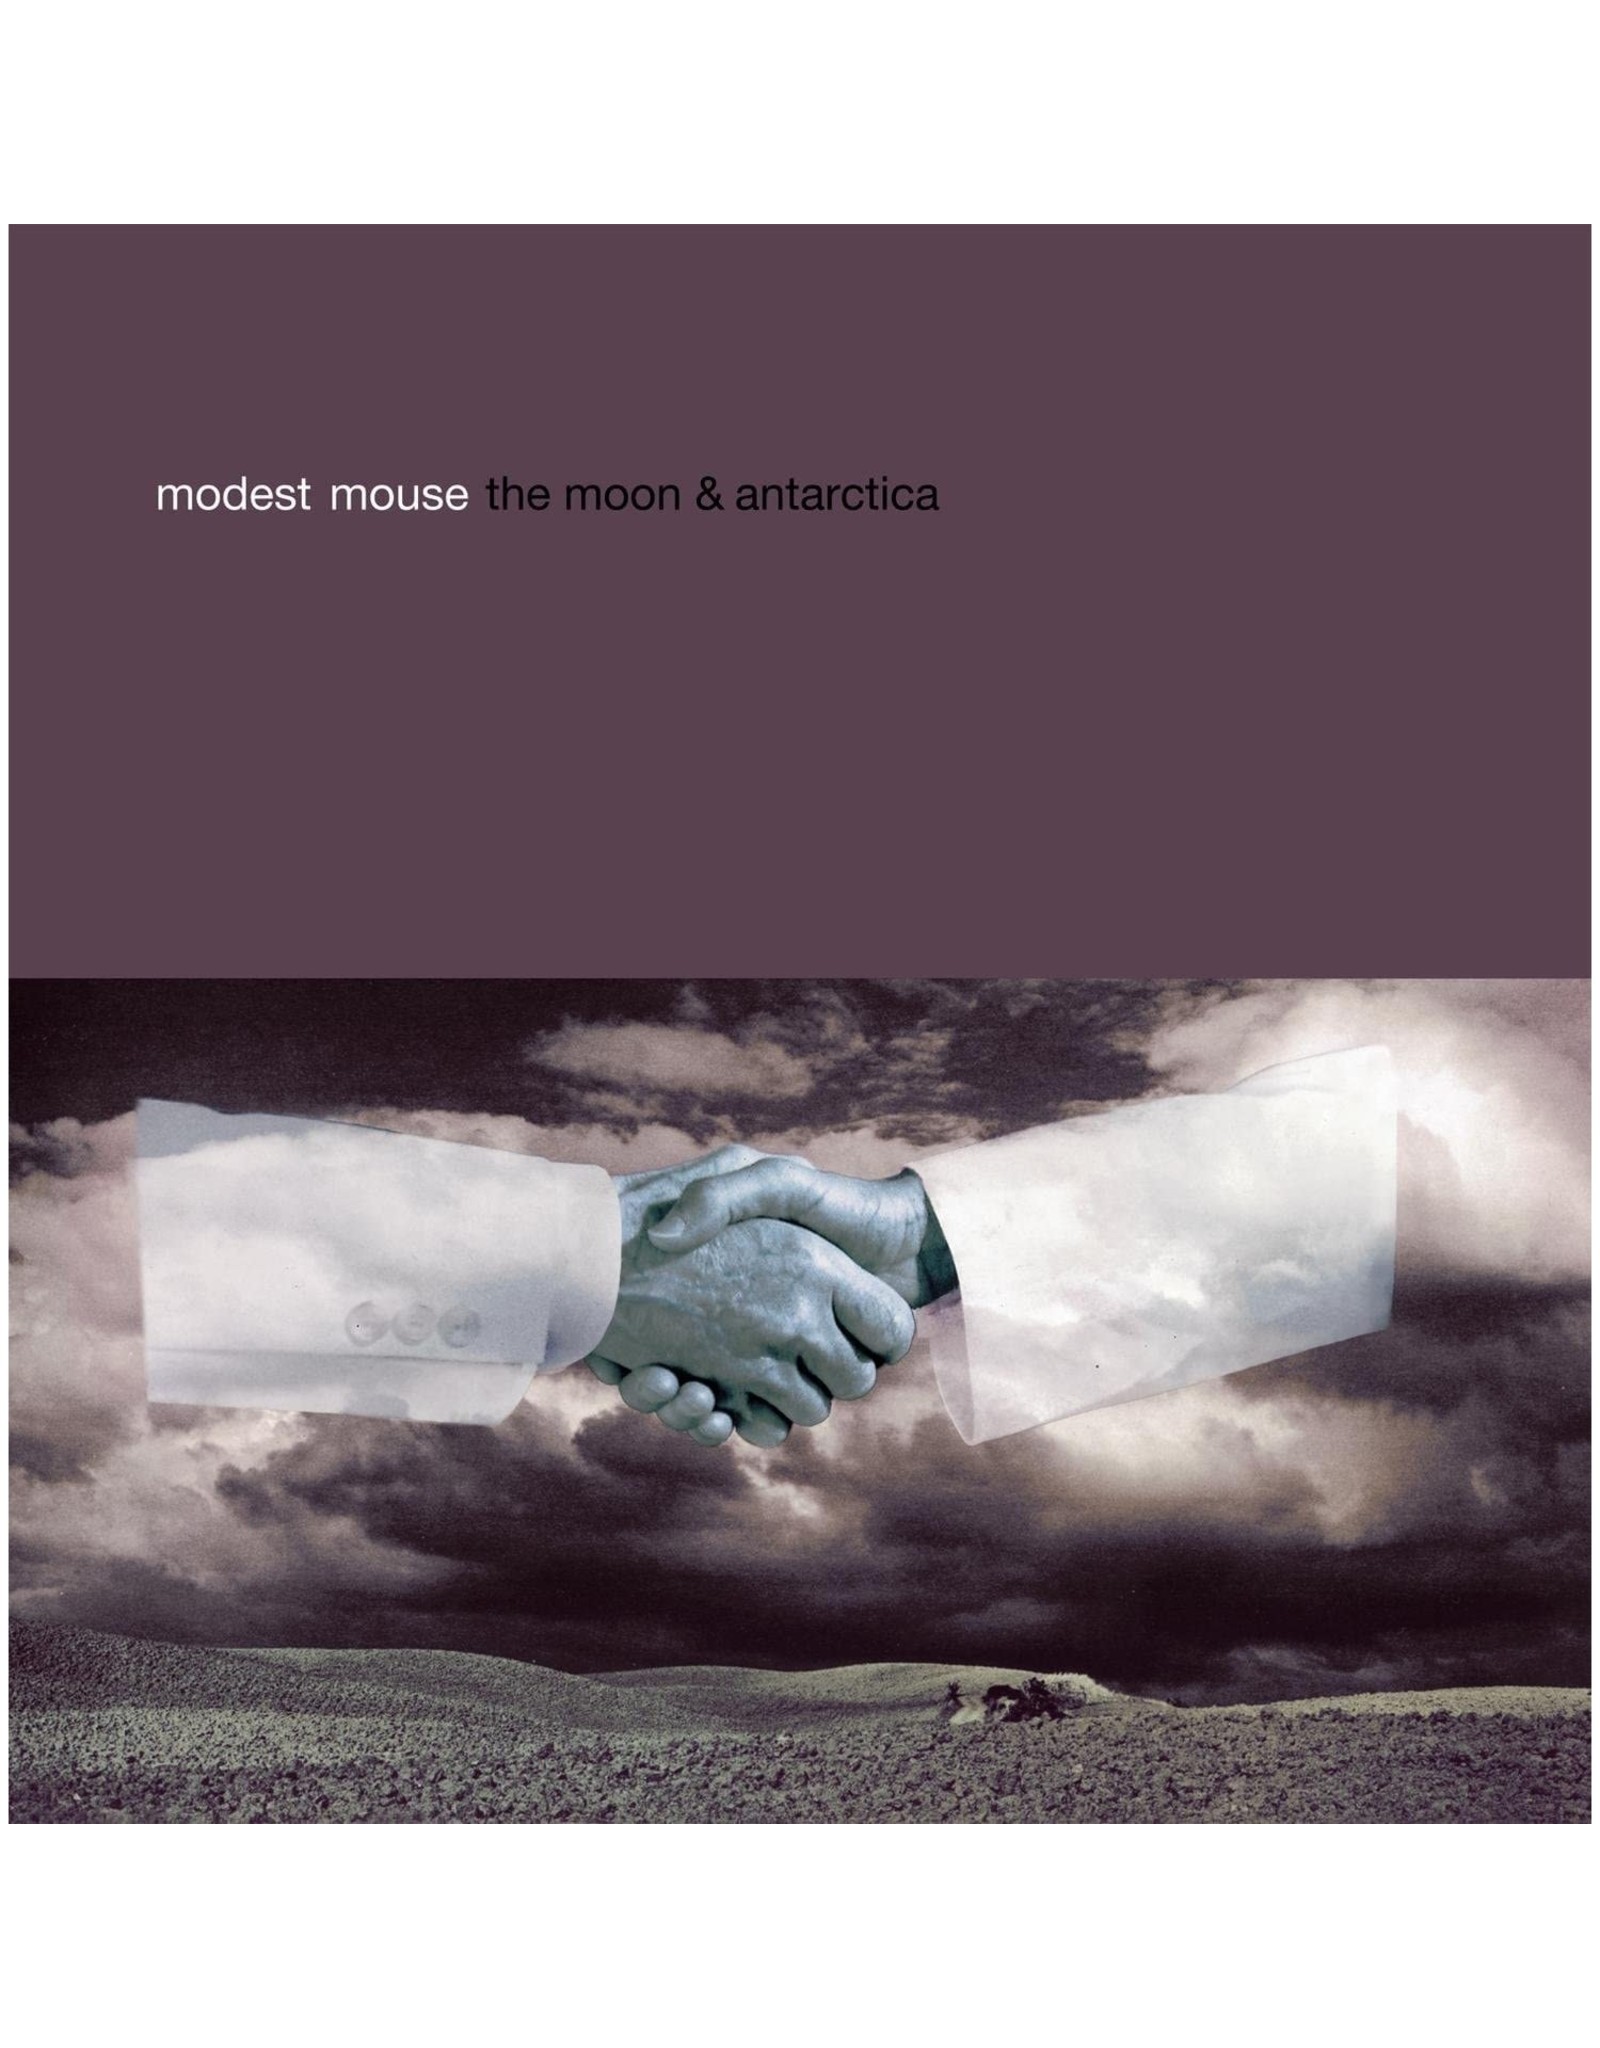 Modest Mouse - The Moon & Antarctica (10th Anniversary)